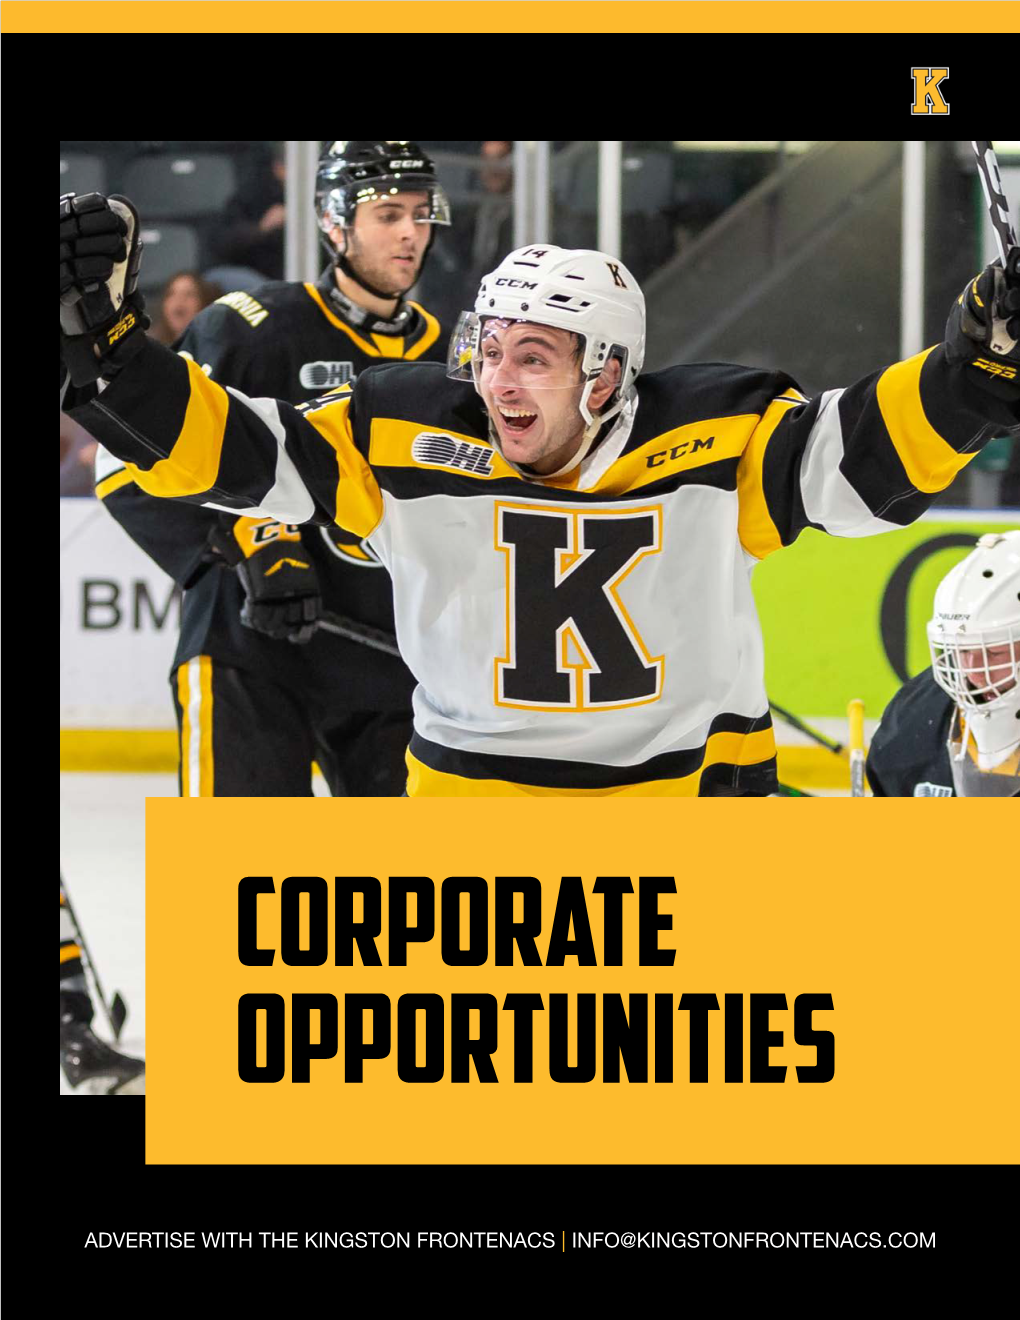 Advertise with the Kingston Frontenacs